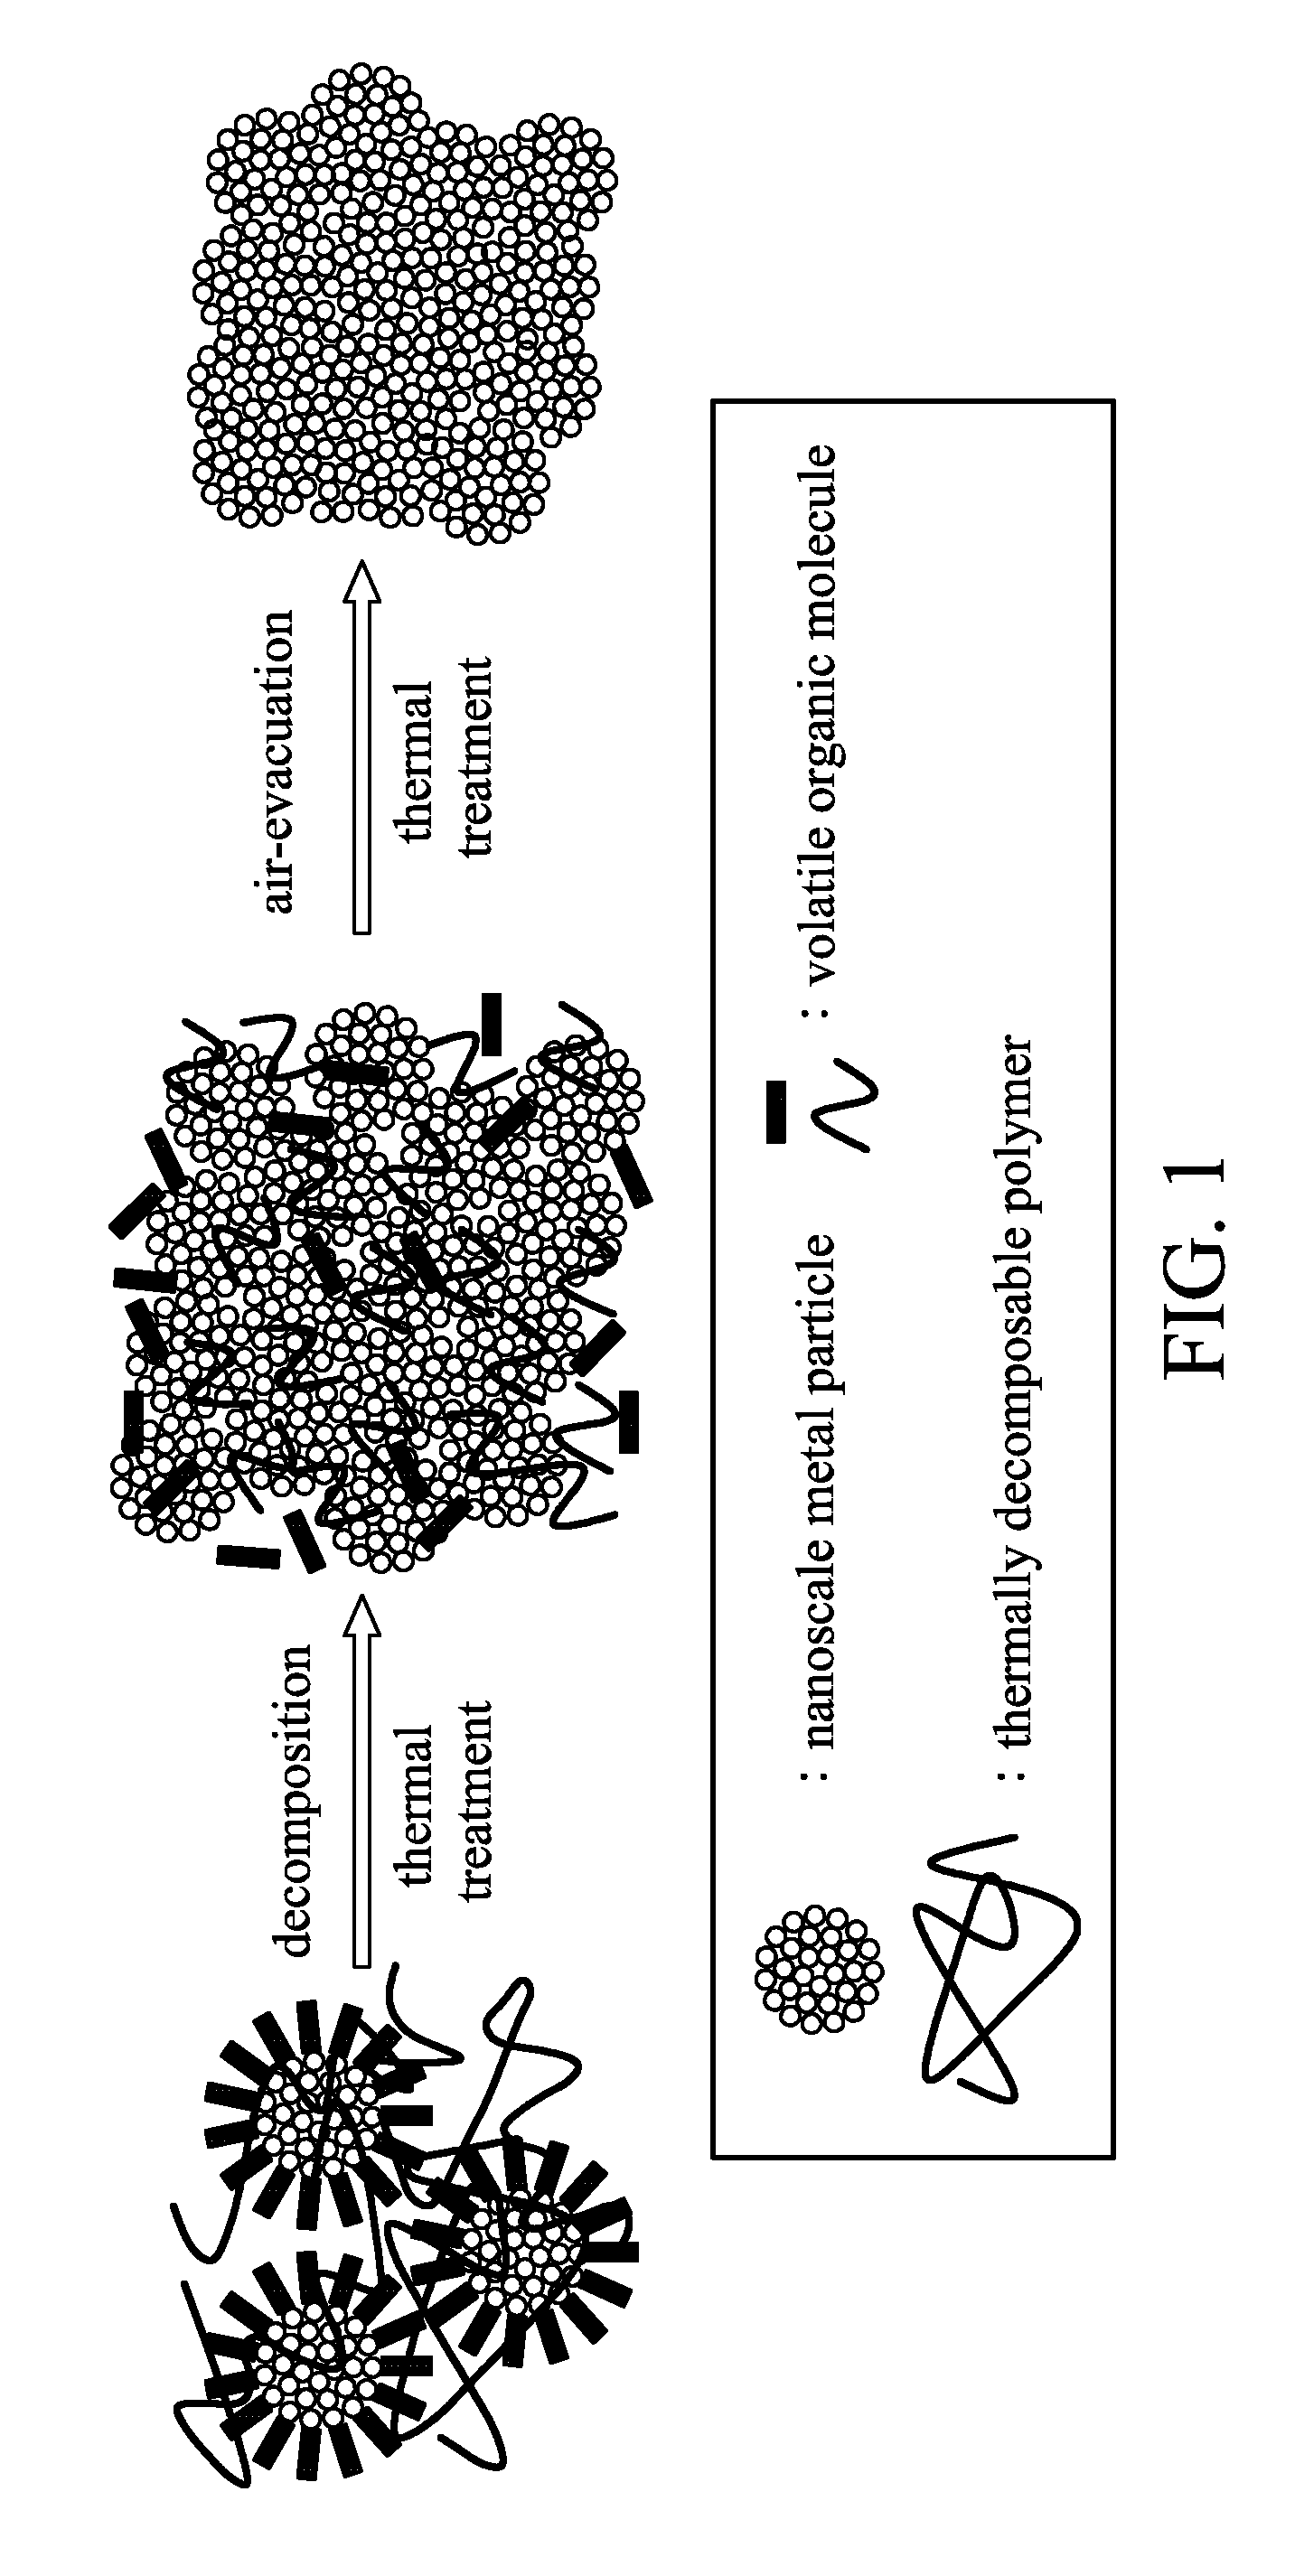 Highly conductive ink composition and method for fabricating a metal conductive pattern